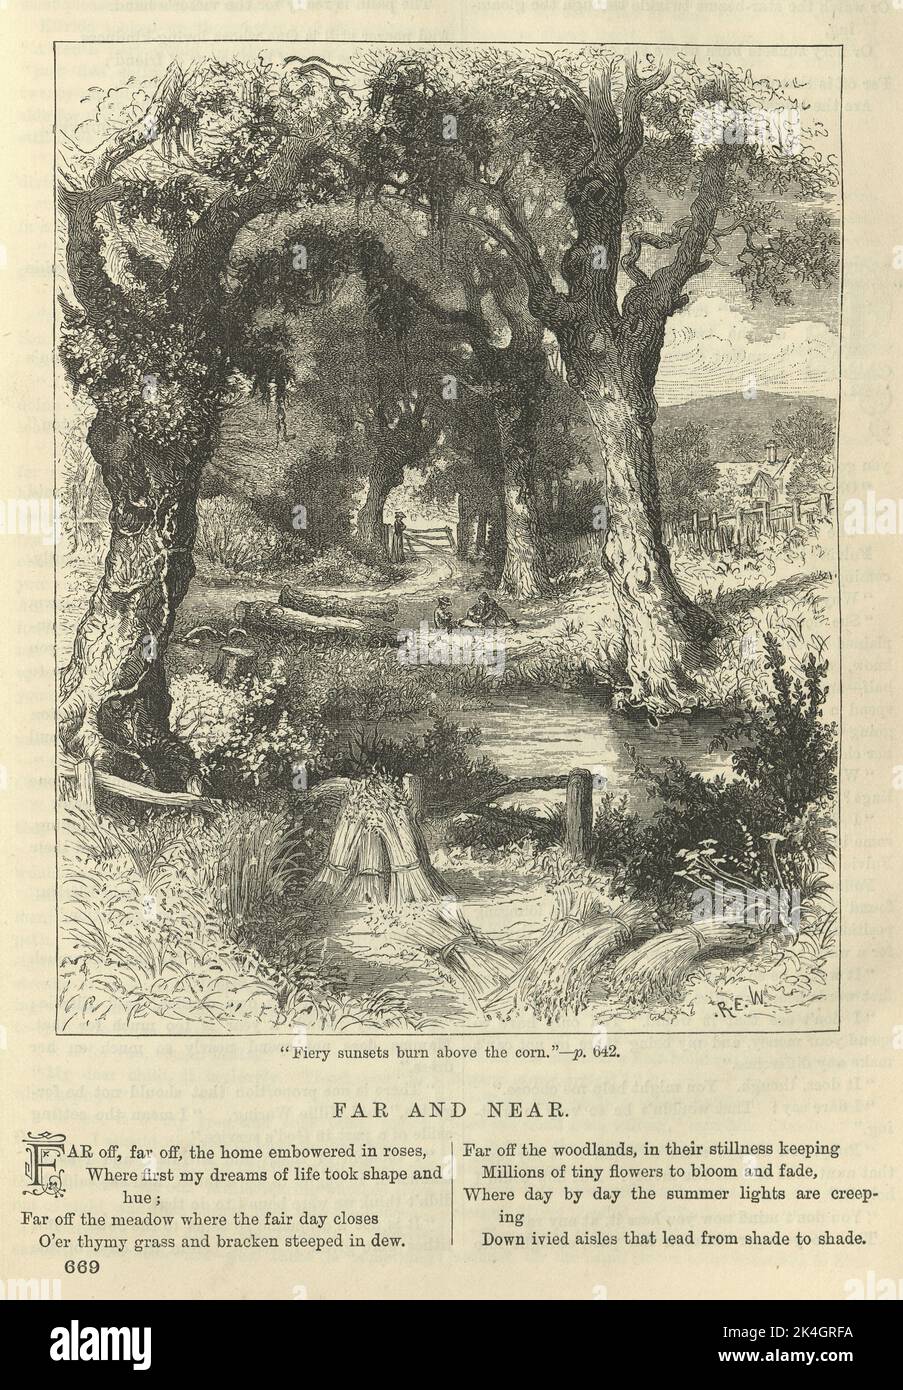 Illustration for Victorian poem Far and Near, 1870s, 19th Century, Wheat field, Woodland path, Rural landscape Stock Photo